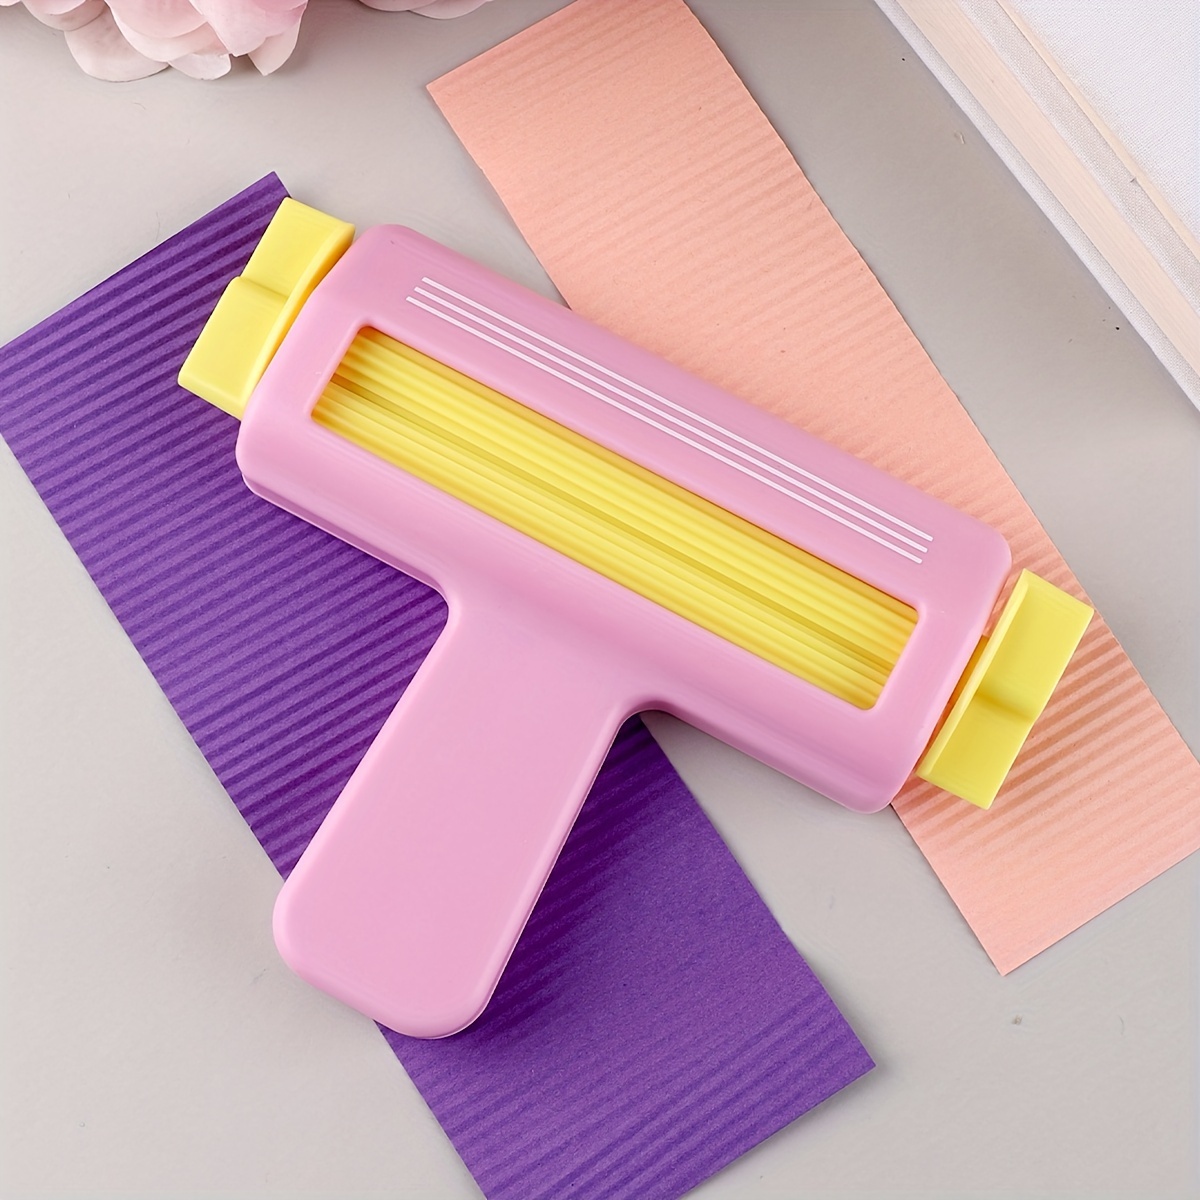 1pc Paper Crimper for Handmade Crafts Perfect for Cutting Aluminum Foil  Cardboard and Wax Paper